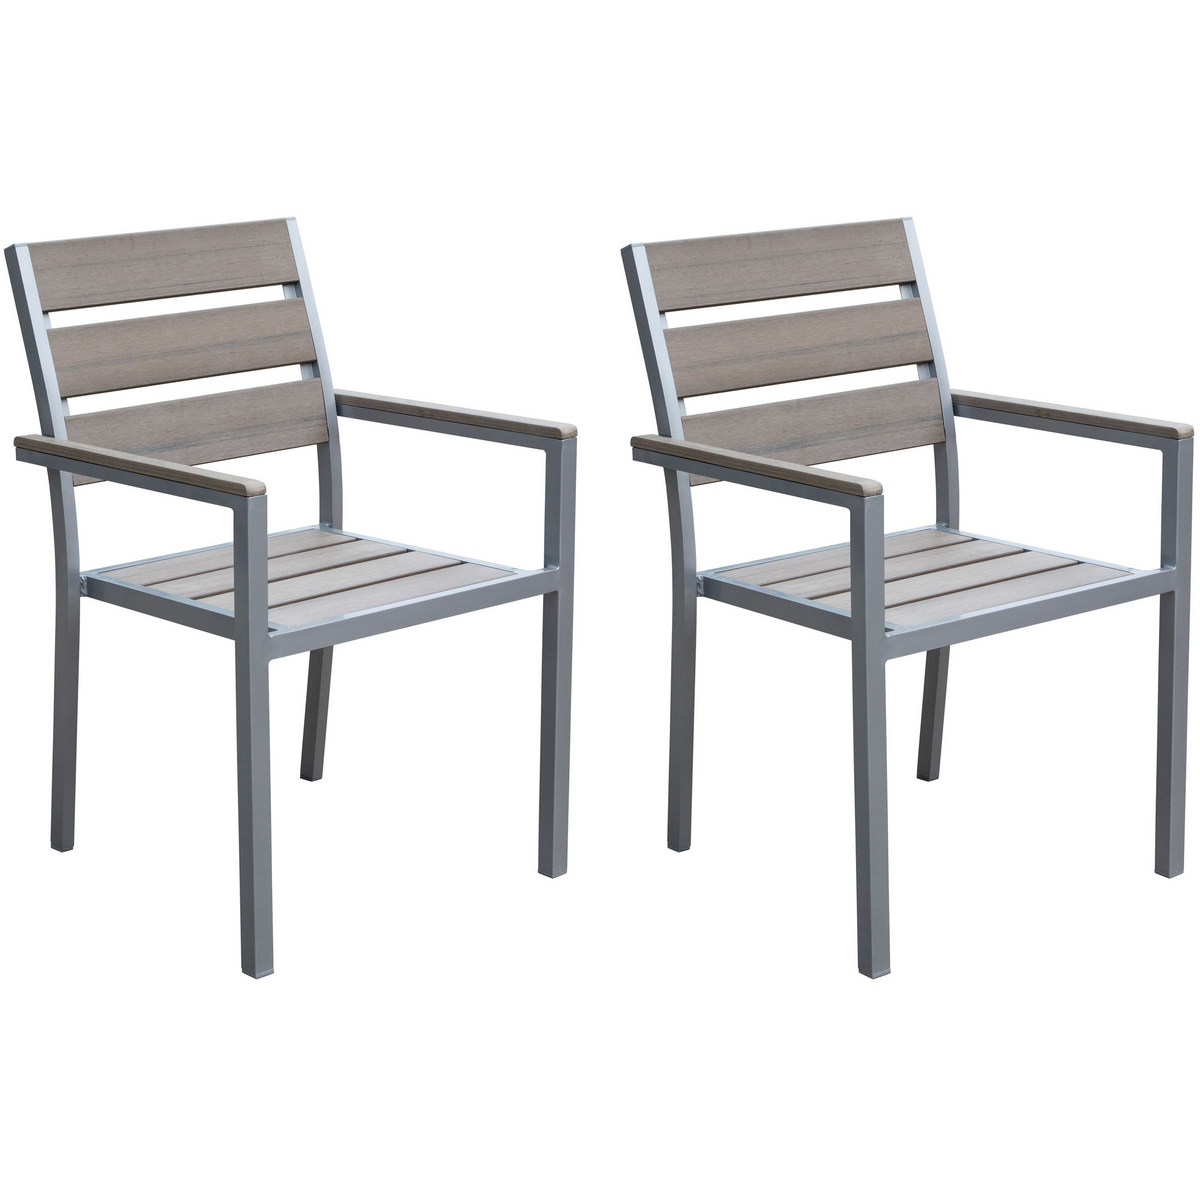 CorLiving PJR-571-C Gallant Sun Bleached Grey Outdoor Dining Chairs, Set of 2